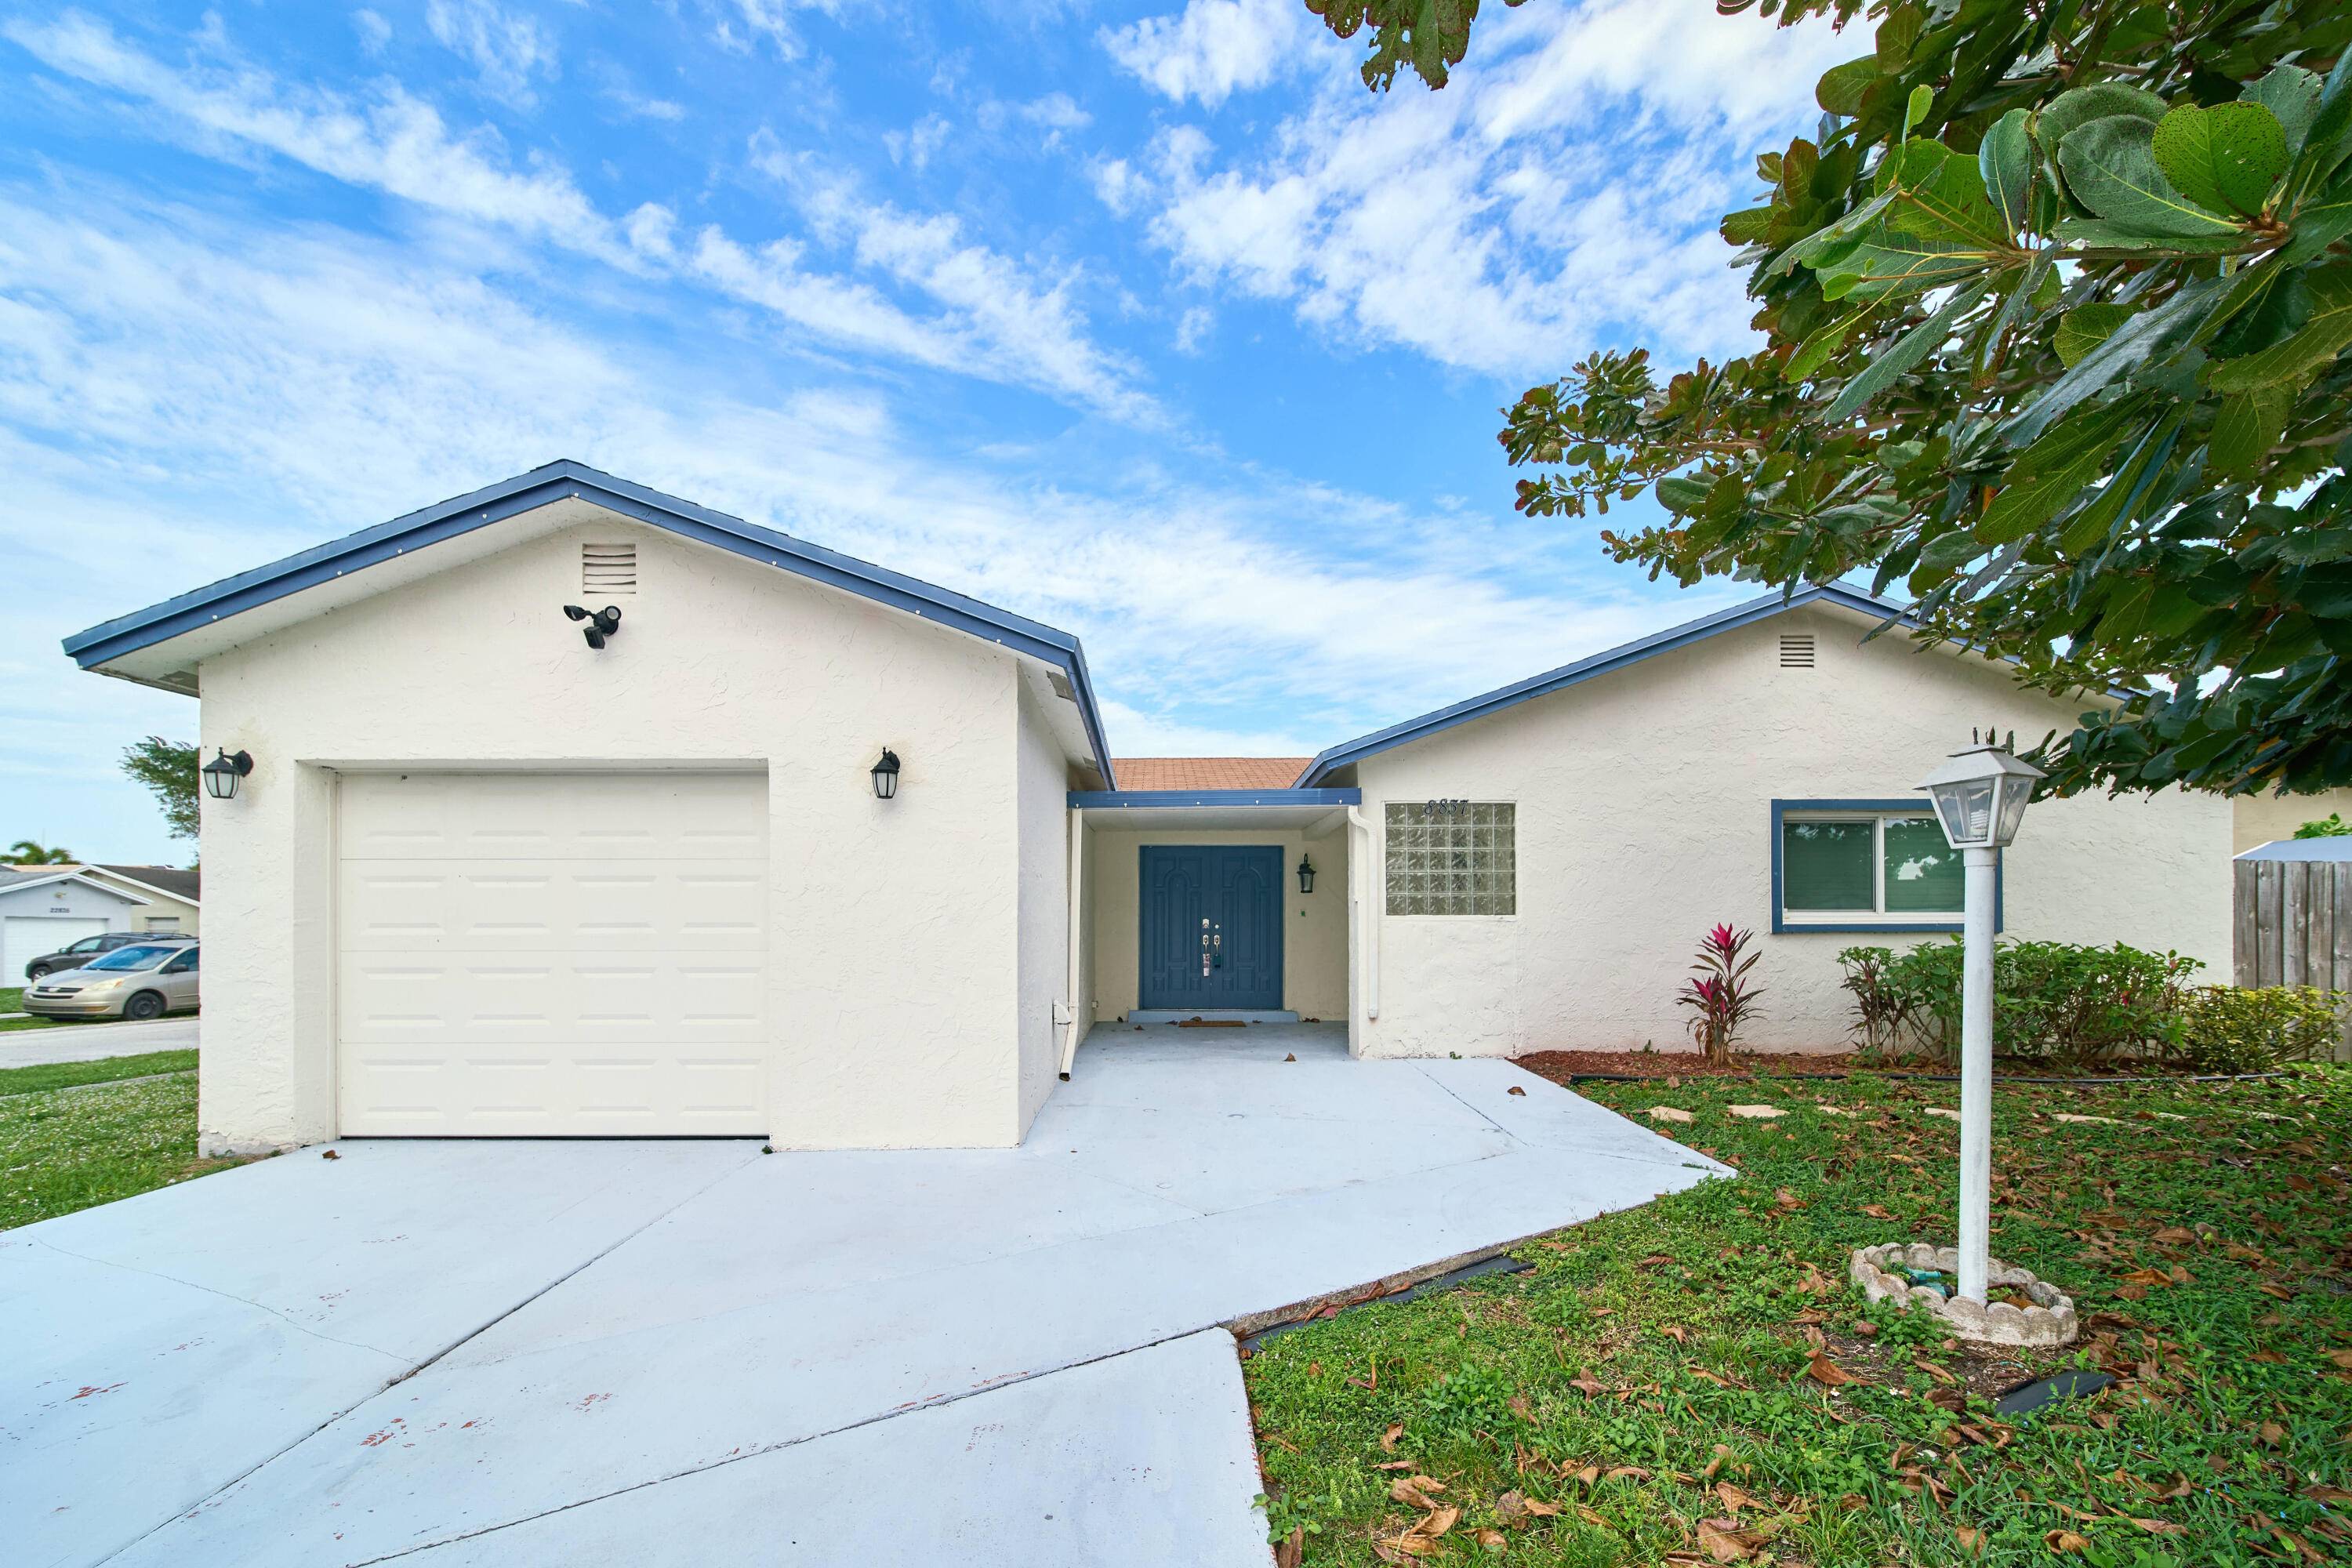 Four bed room house centrally located in Boca Raton.